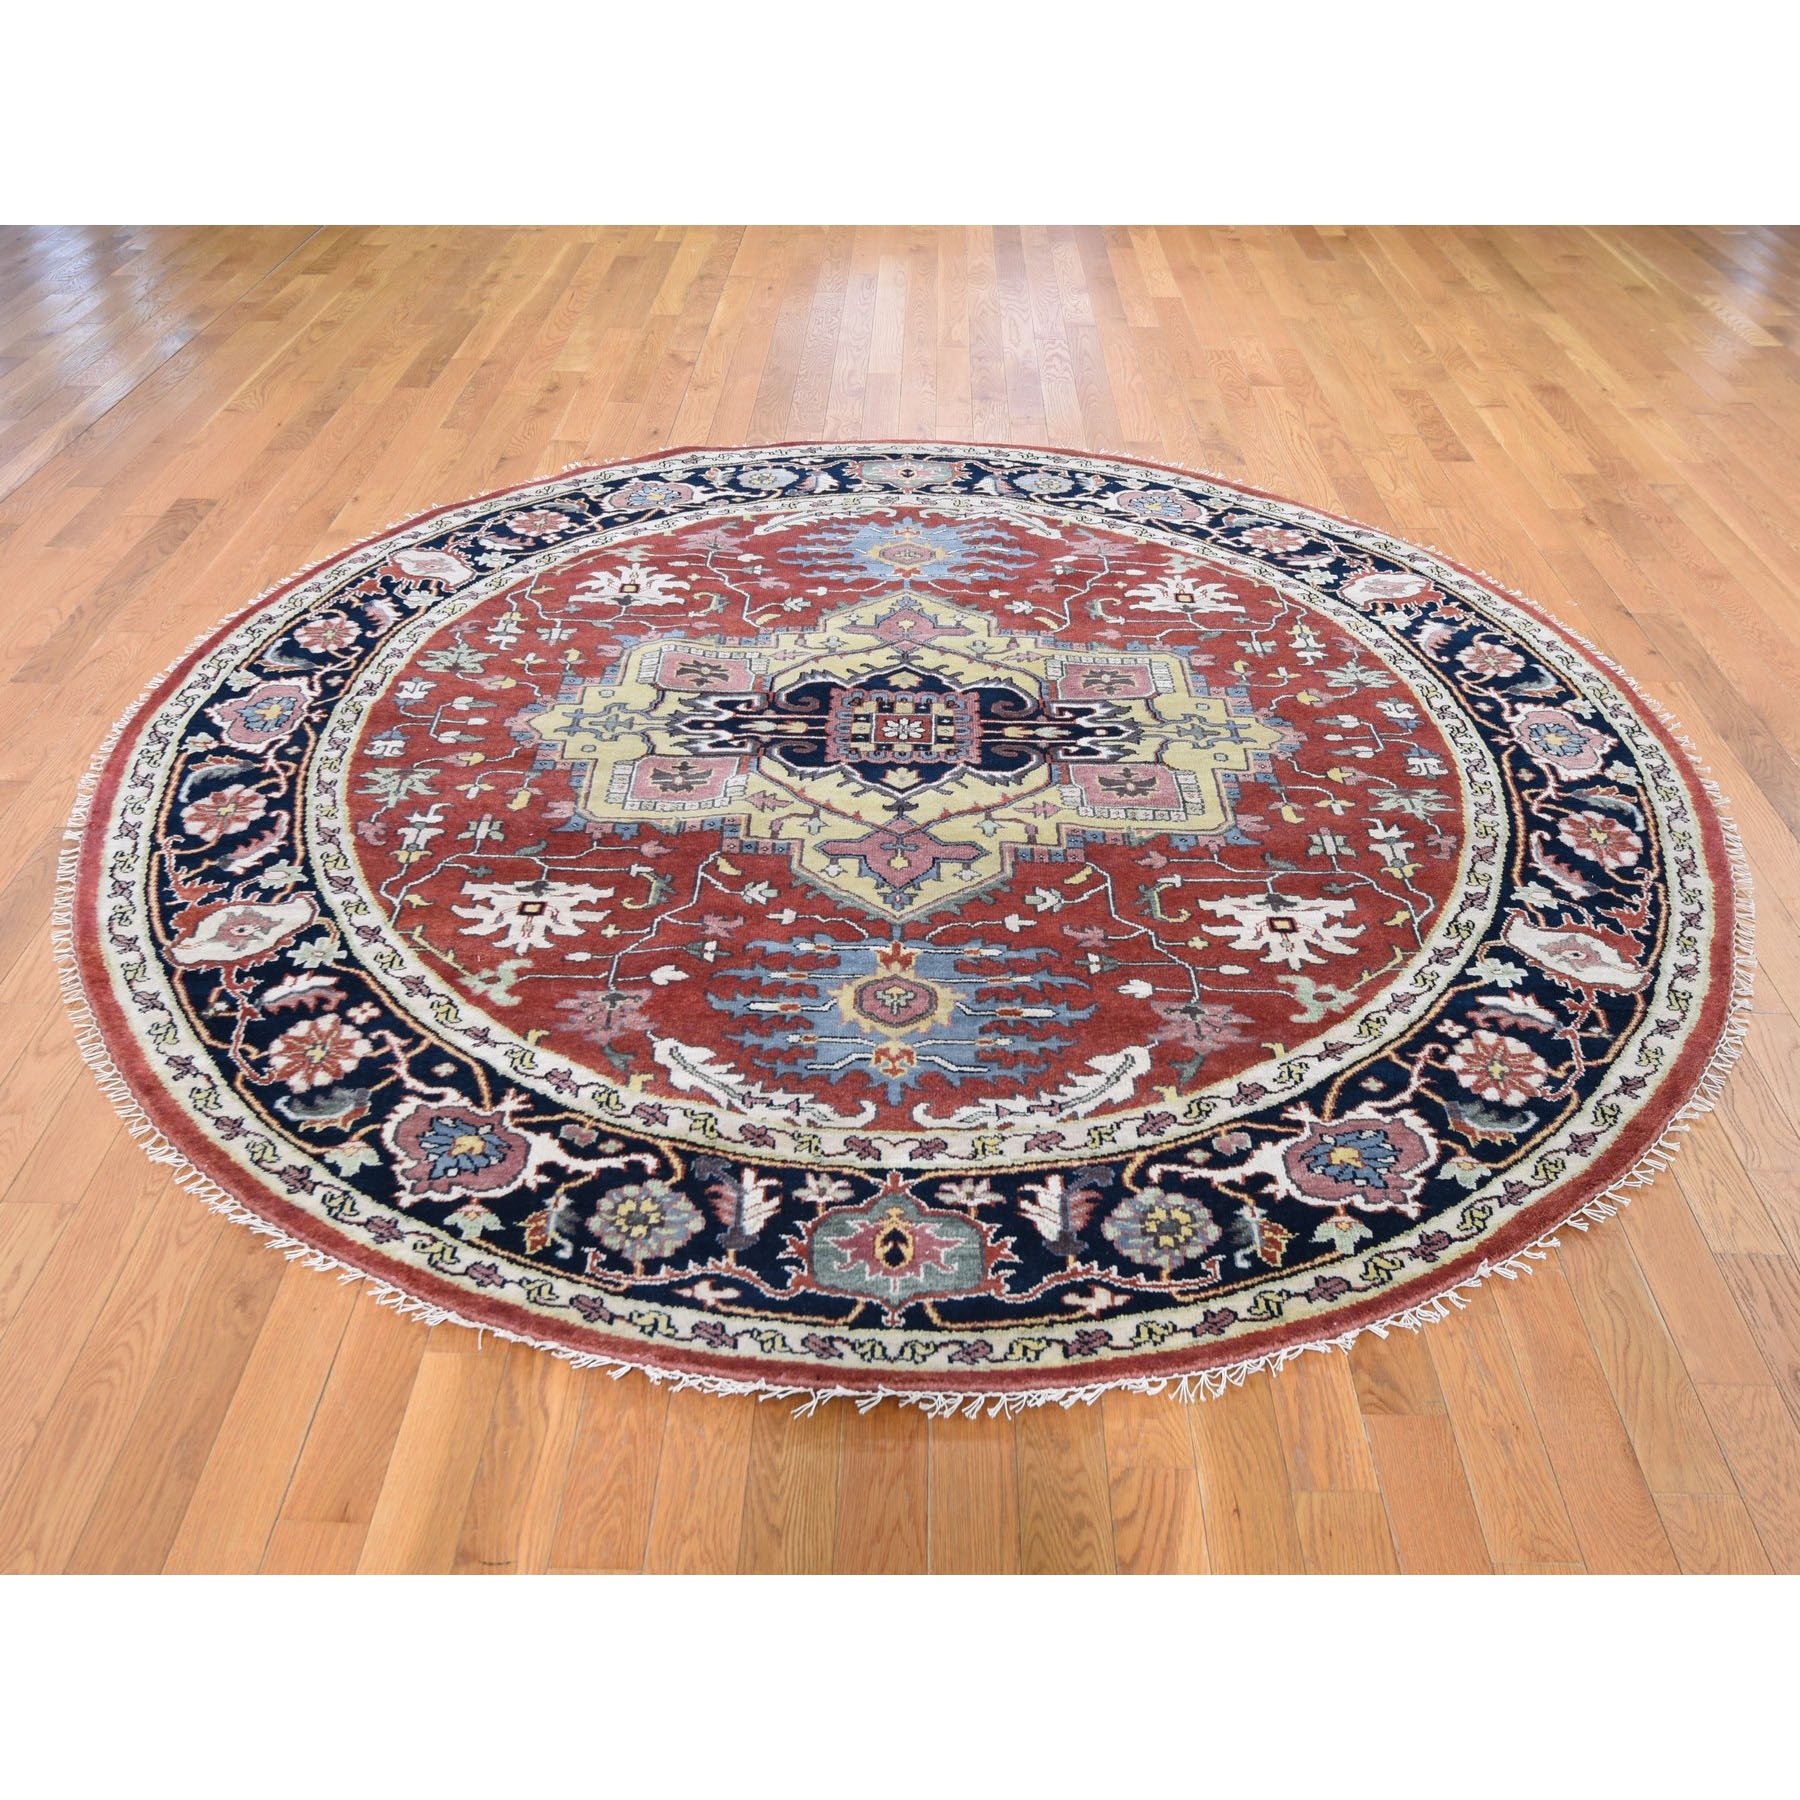 7-10 x7-10  Round Red Heriz Revival Pure Wool Hand Knotted Oriental Rug 